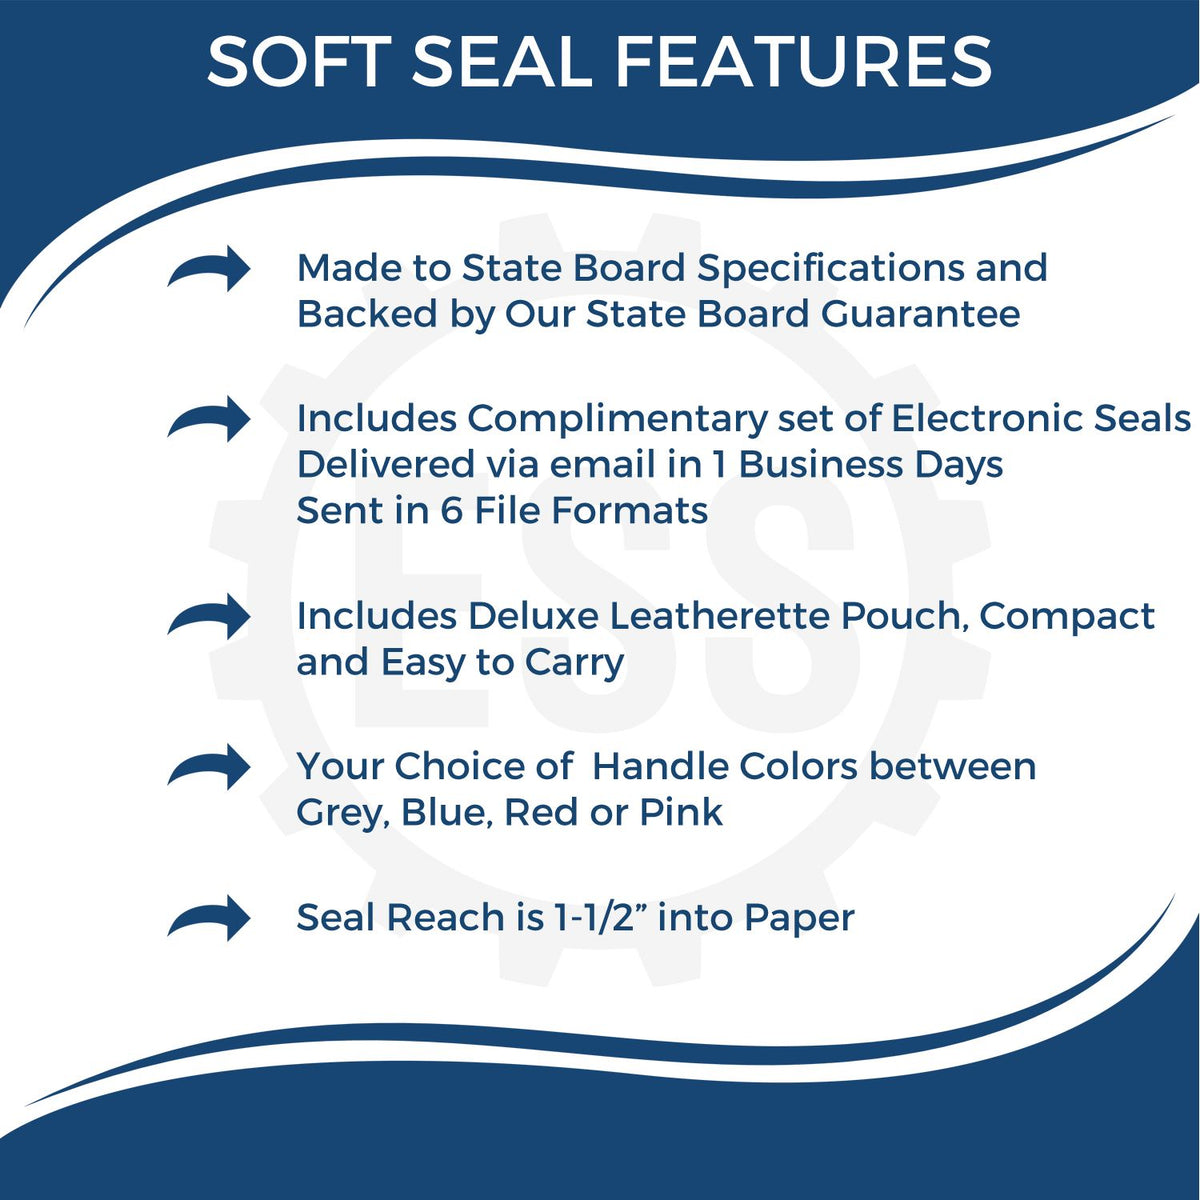 A picture of an infographic highlighting the selling points for the Soft Alaska Professional Geologist Seal